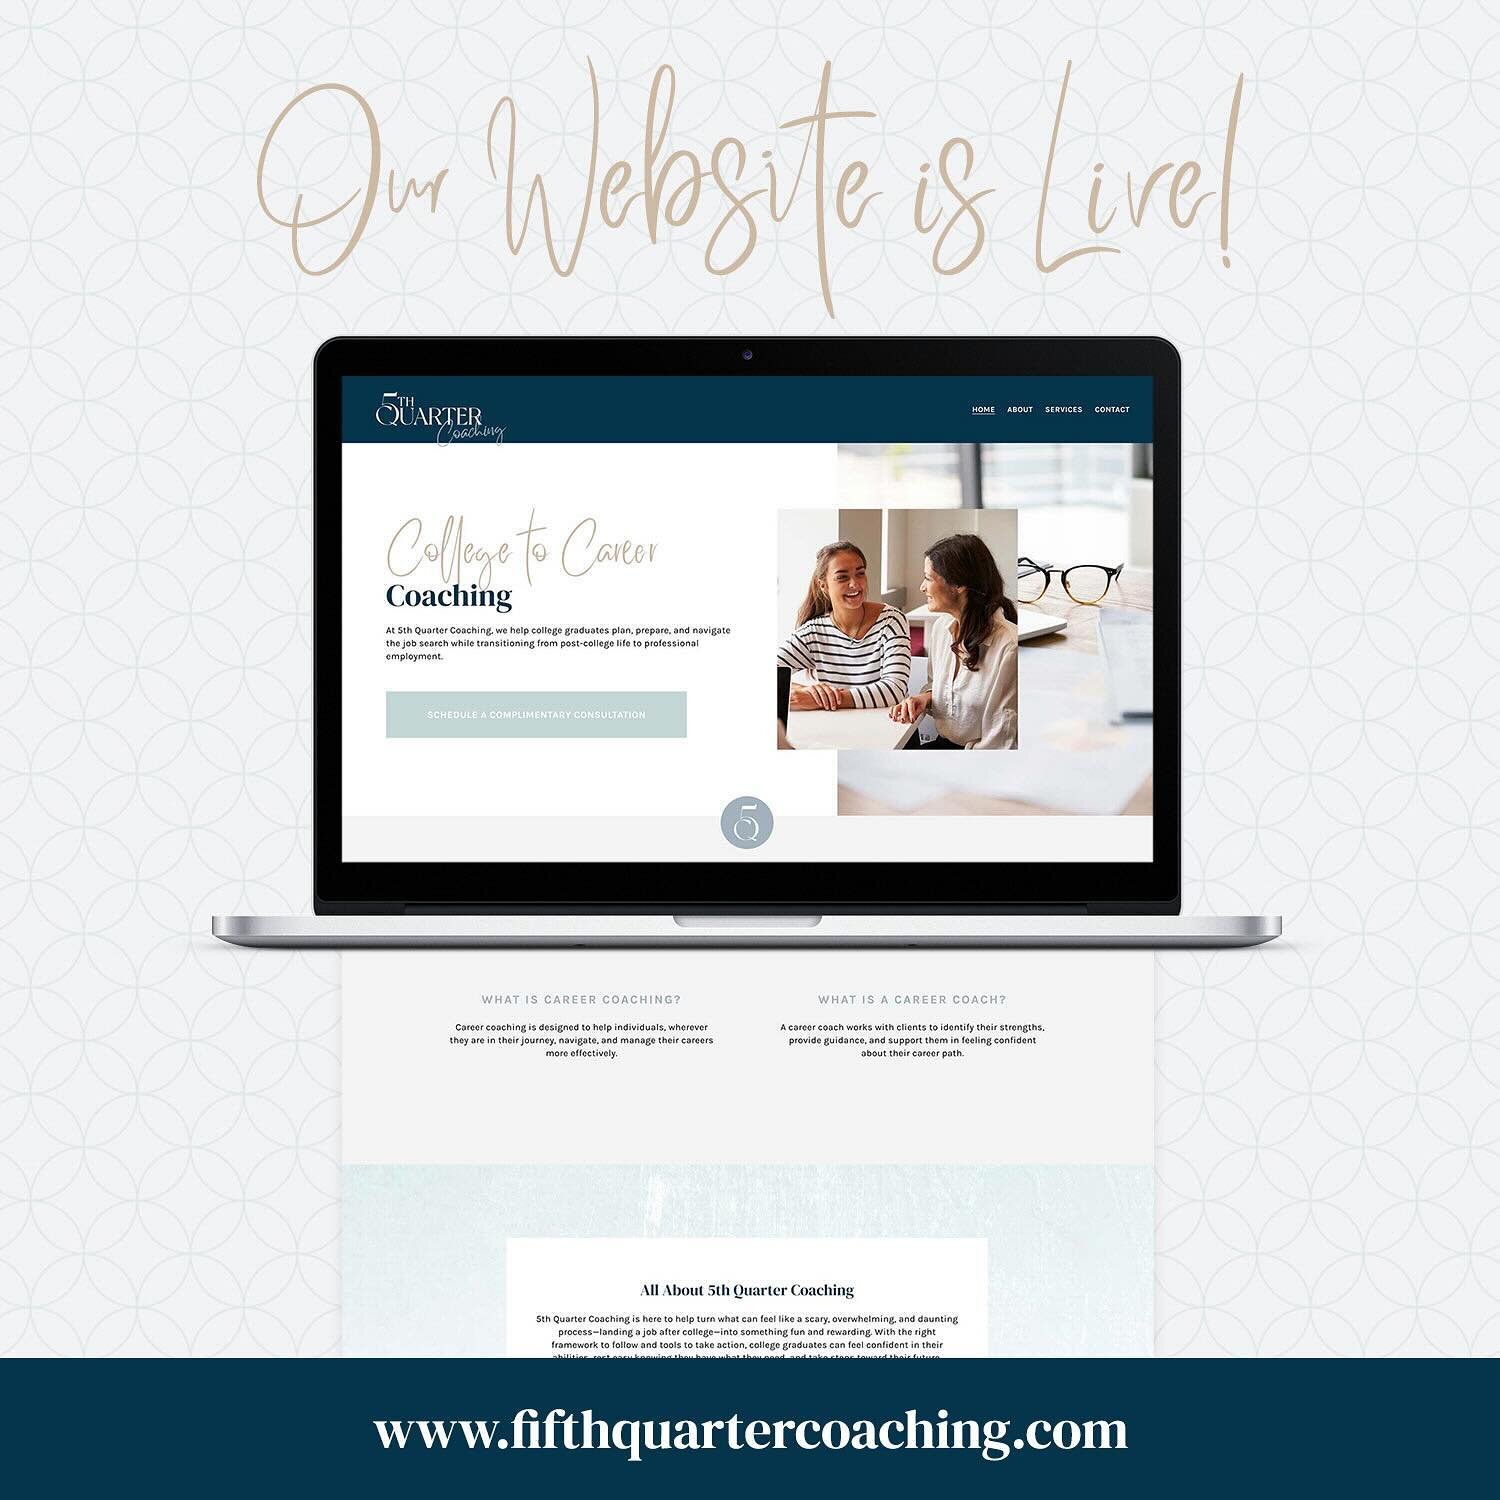 We&rsquo;re excited to share the launch of our website!  www.fifthquartercoaching.com

Are you a college grad looking for career coaching? Are you a college junior looking for internship interview preparation? Are you a parent looking to help your co